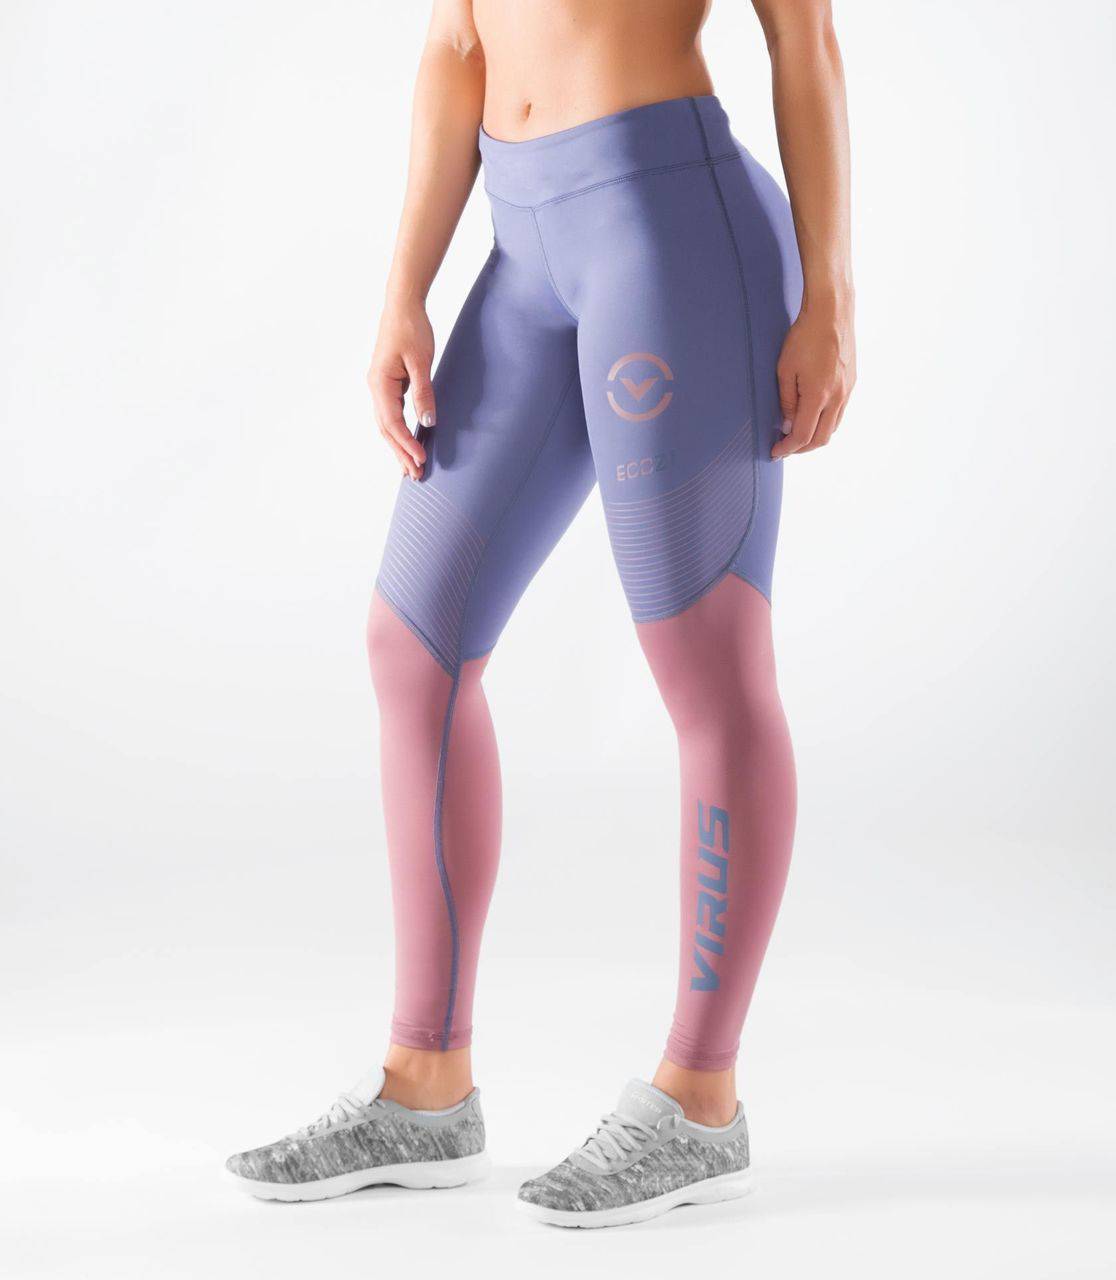 FS-07 Compression pants, 5 integrated pieces, for American